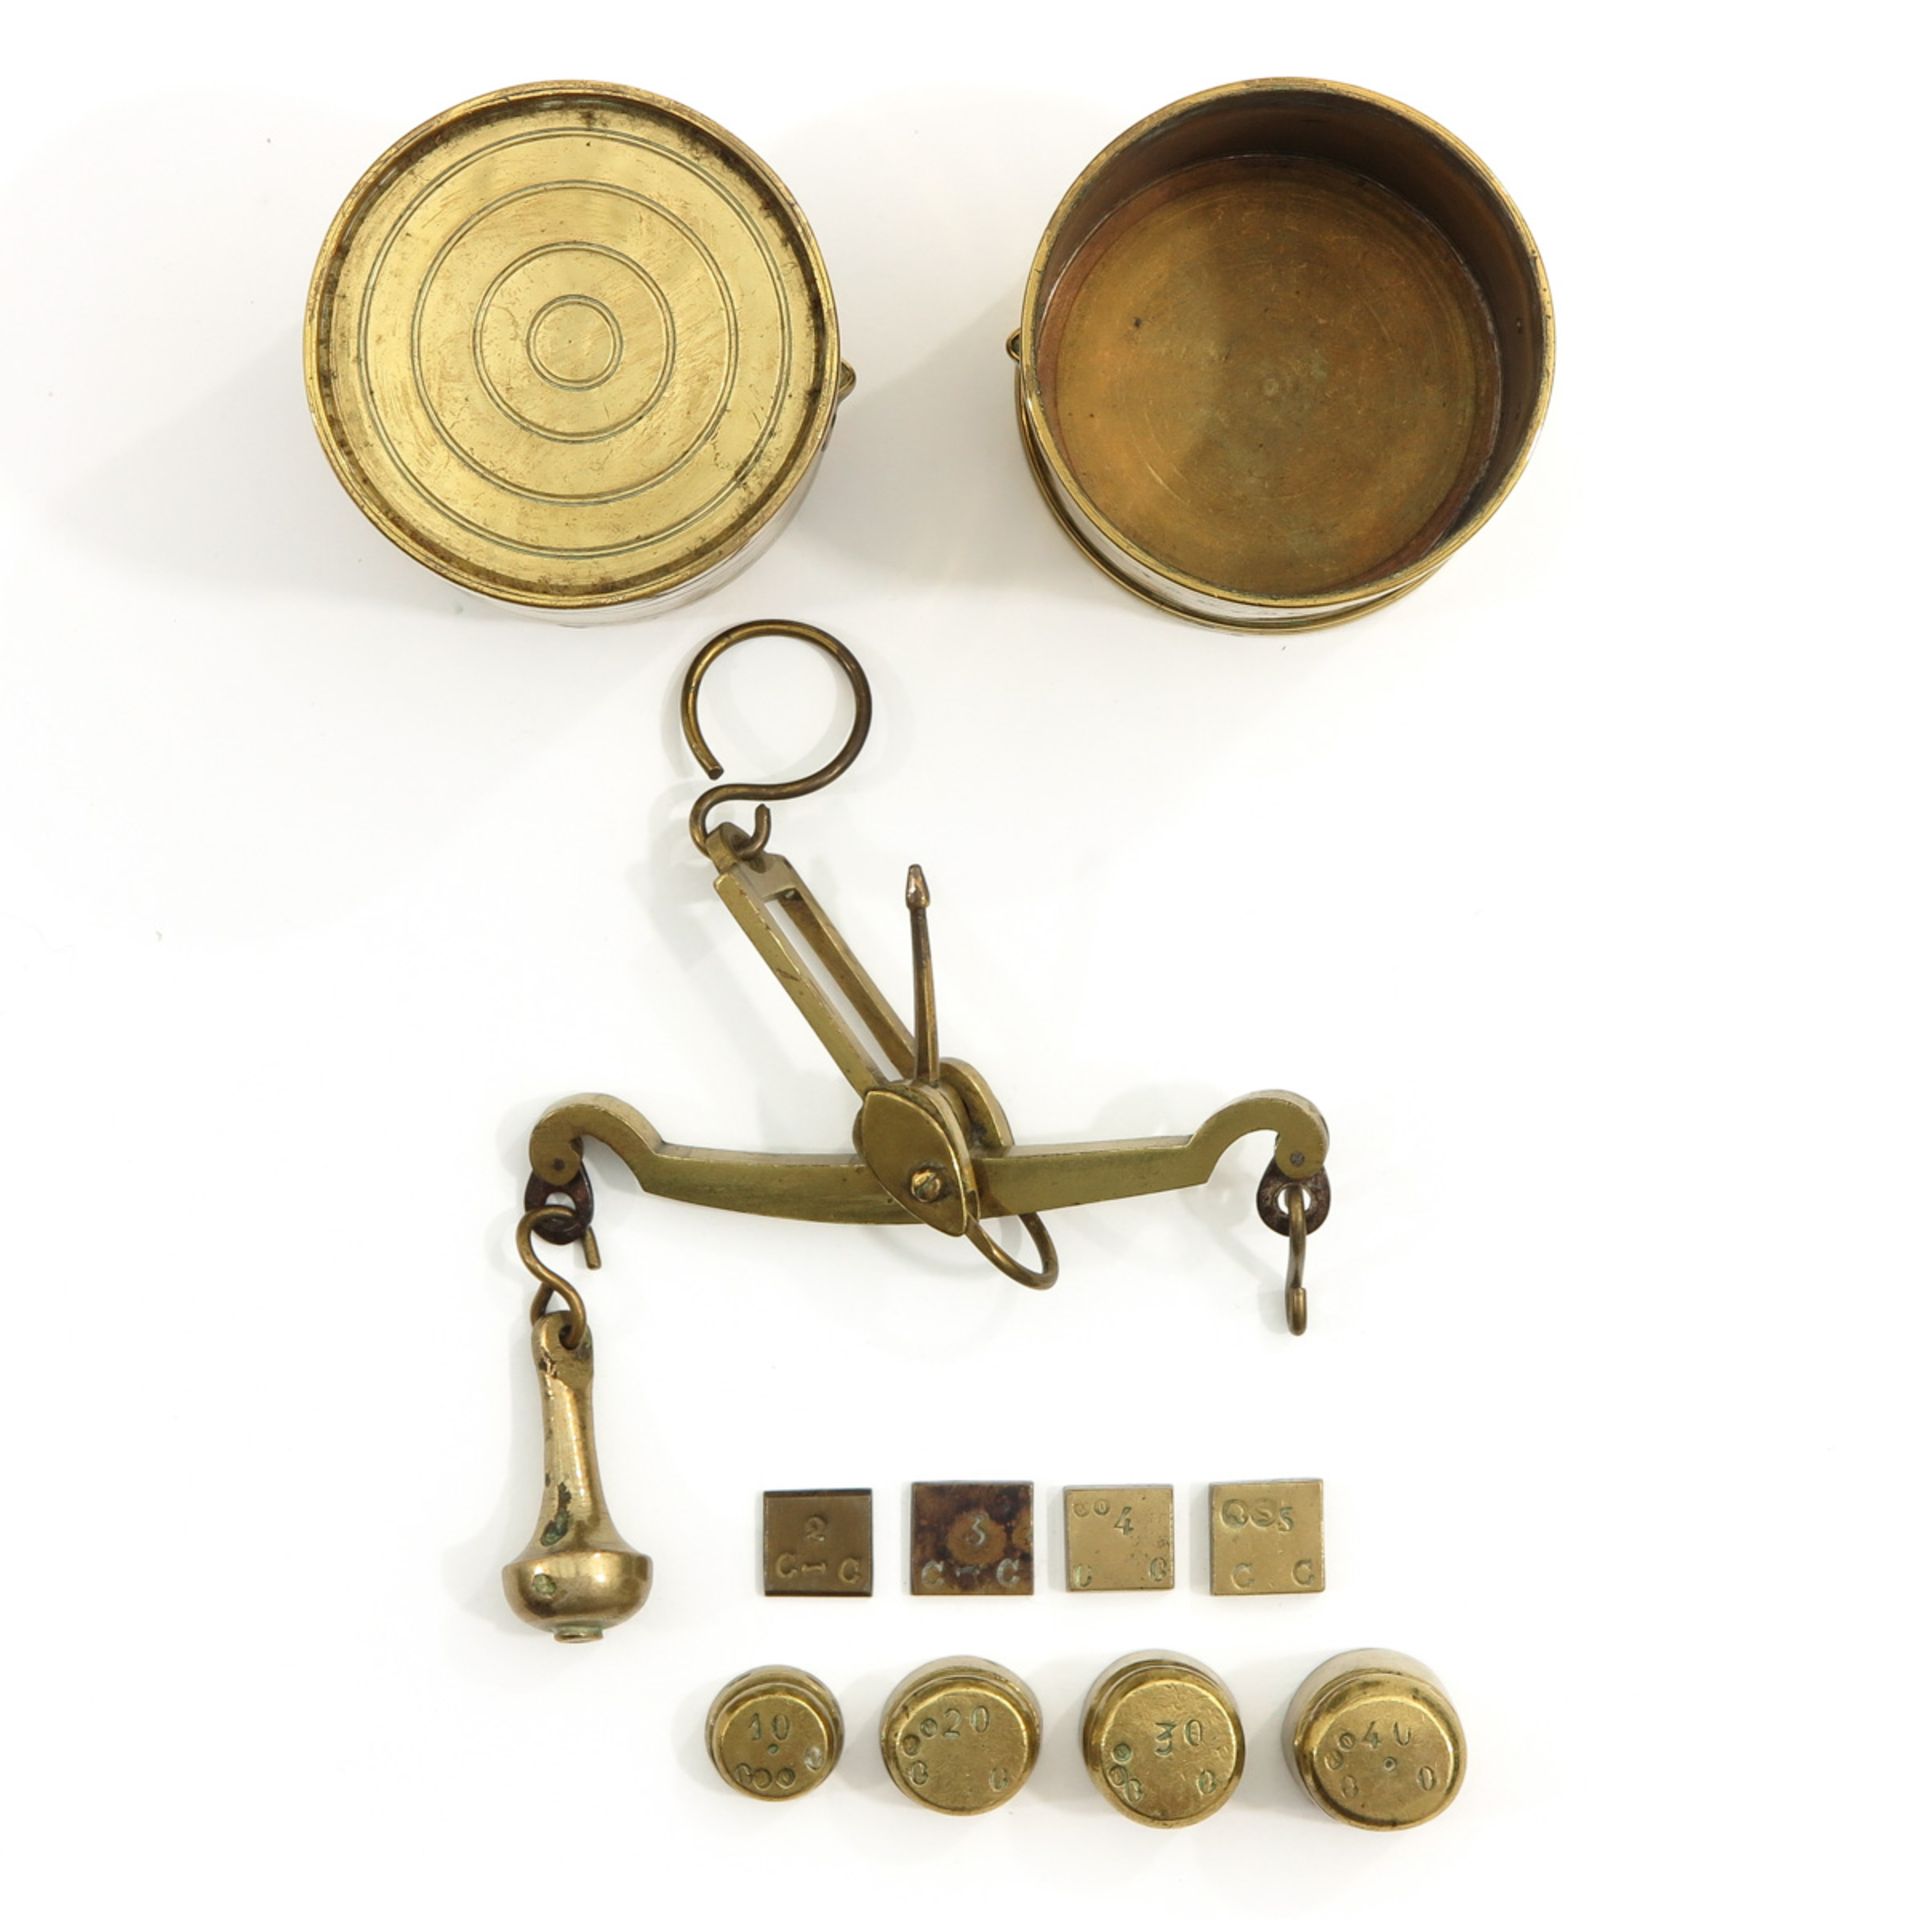 An 18th Century Yellow Copper Travel Scale - Image 2 of 7